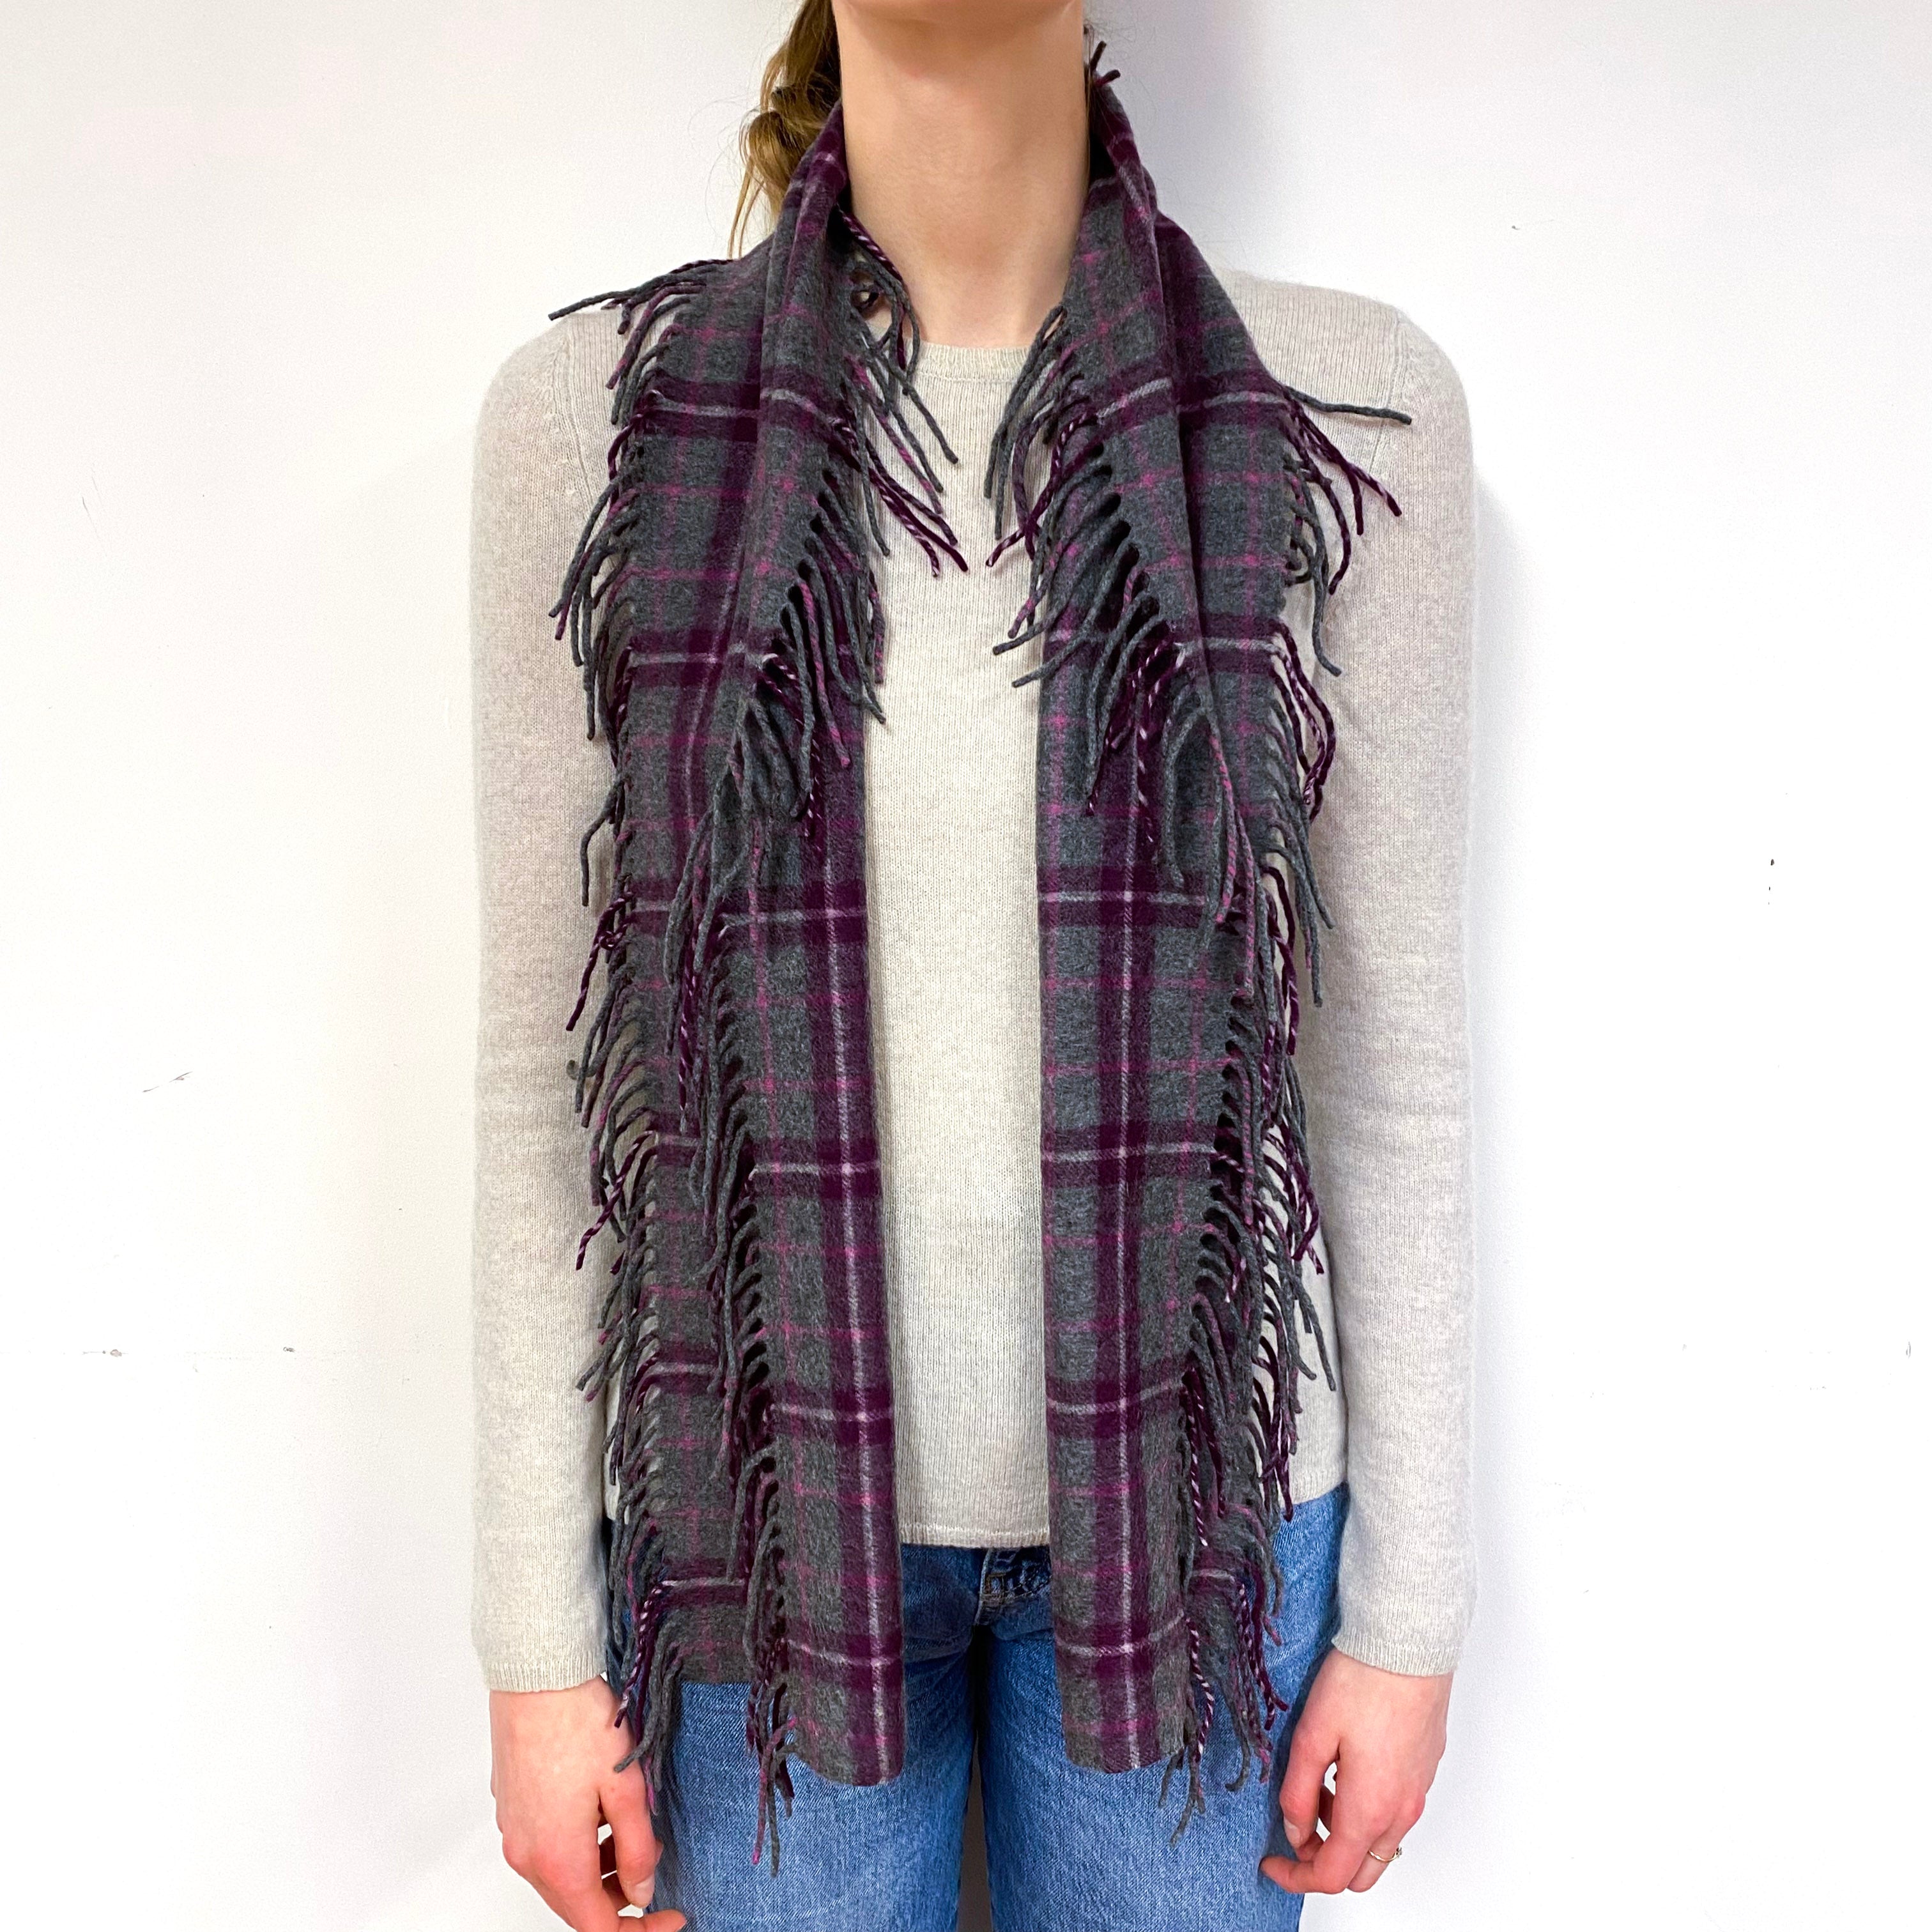 Slate Grey and Plum Checked Scarf